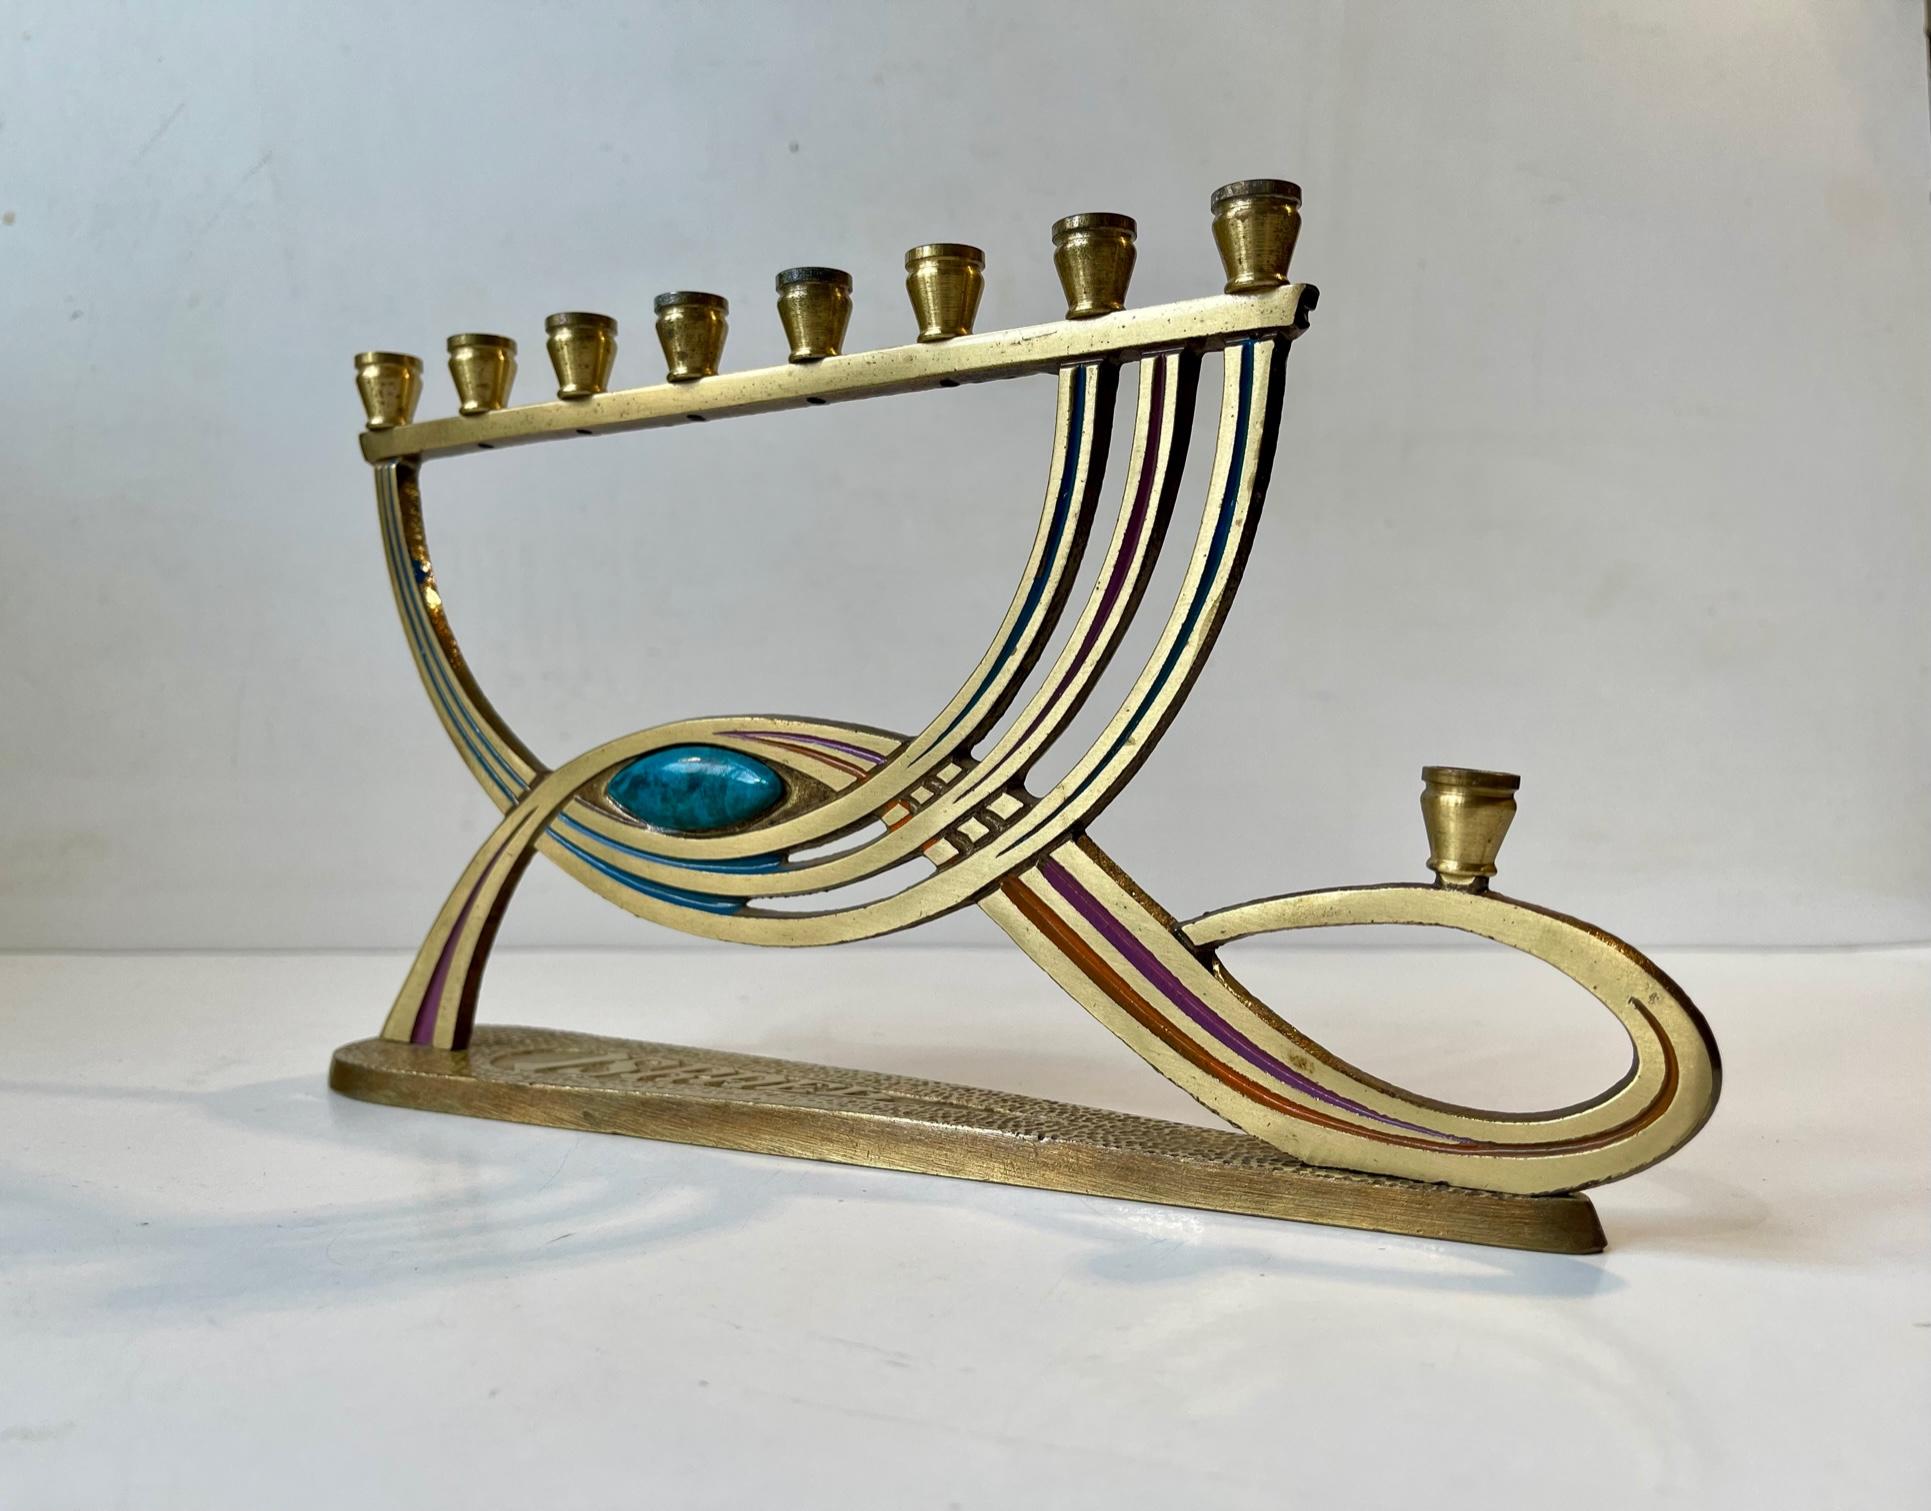 Small intricate brass Chanukah Candelabra manufactured by Tamar in Israel in 1966. Distinct and characteristic Art Deco revival styling. Hand-painted and jeweled with a turquoise stone (possibly green Eilat). It takes 9 taper candles. Stamped: